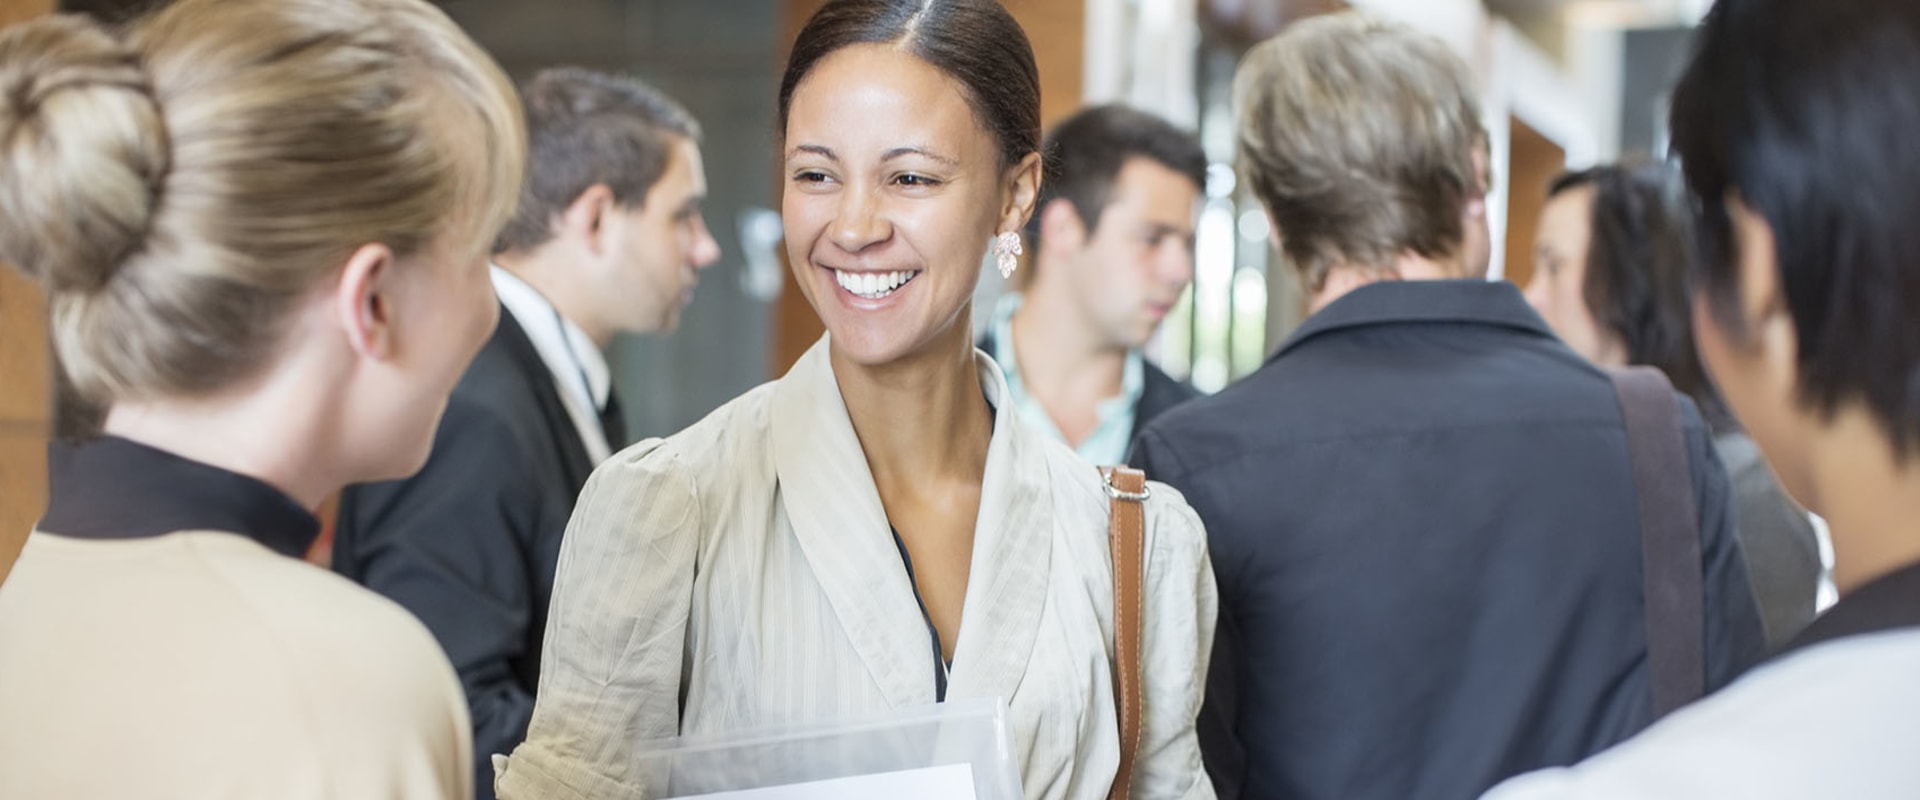 Networking with Medical Professionals: How to Make the Most of In-Person Meetings